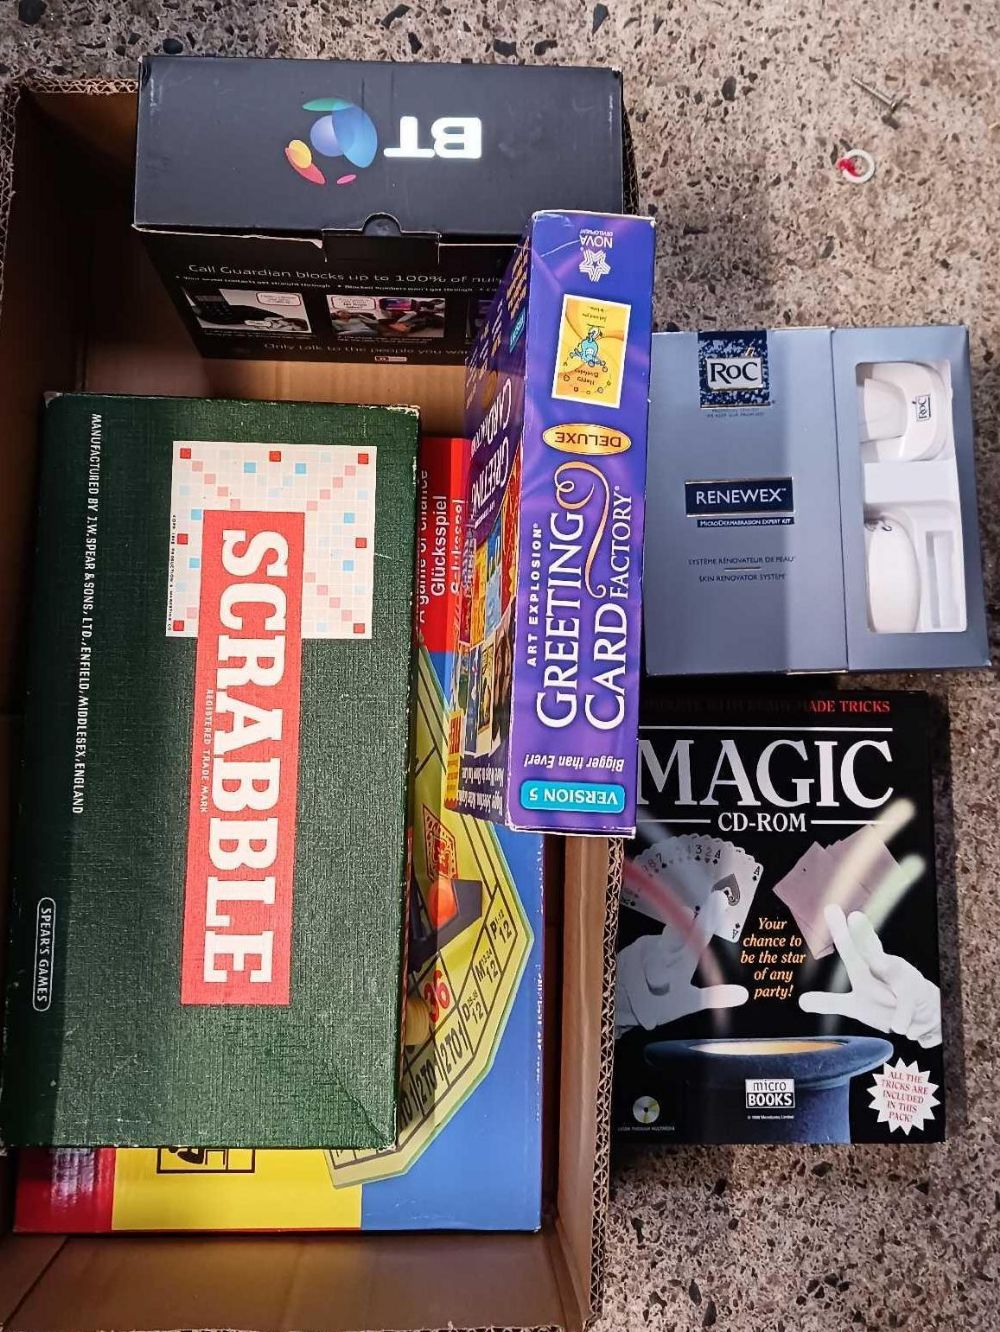 CARTON WITH BOX OF MAGIC TRICKS CD'S, BOXED SET OF SCRABBLE & ROULETTE,